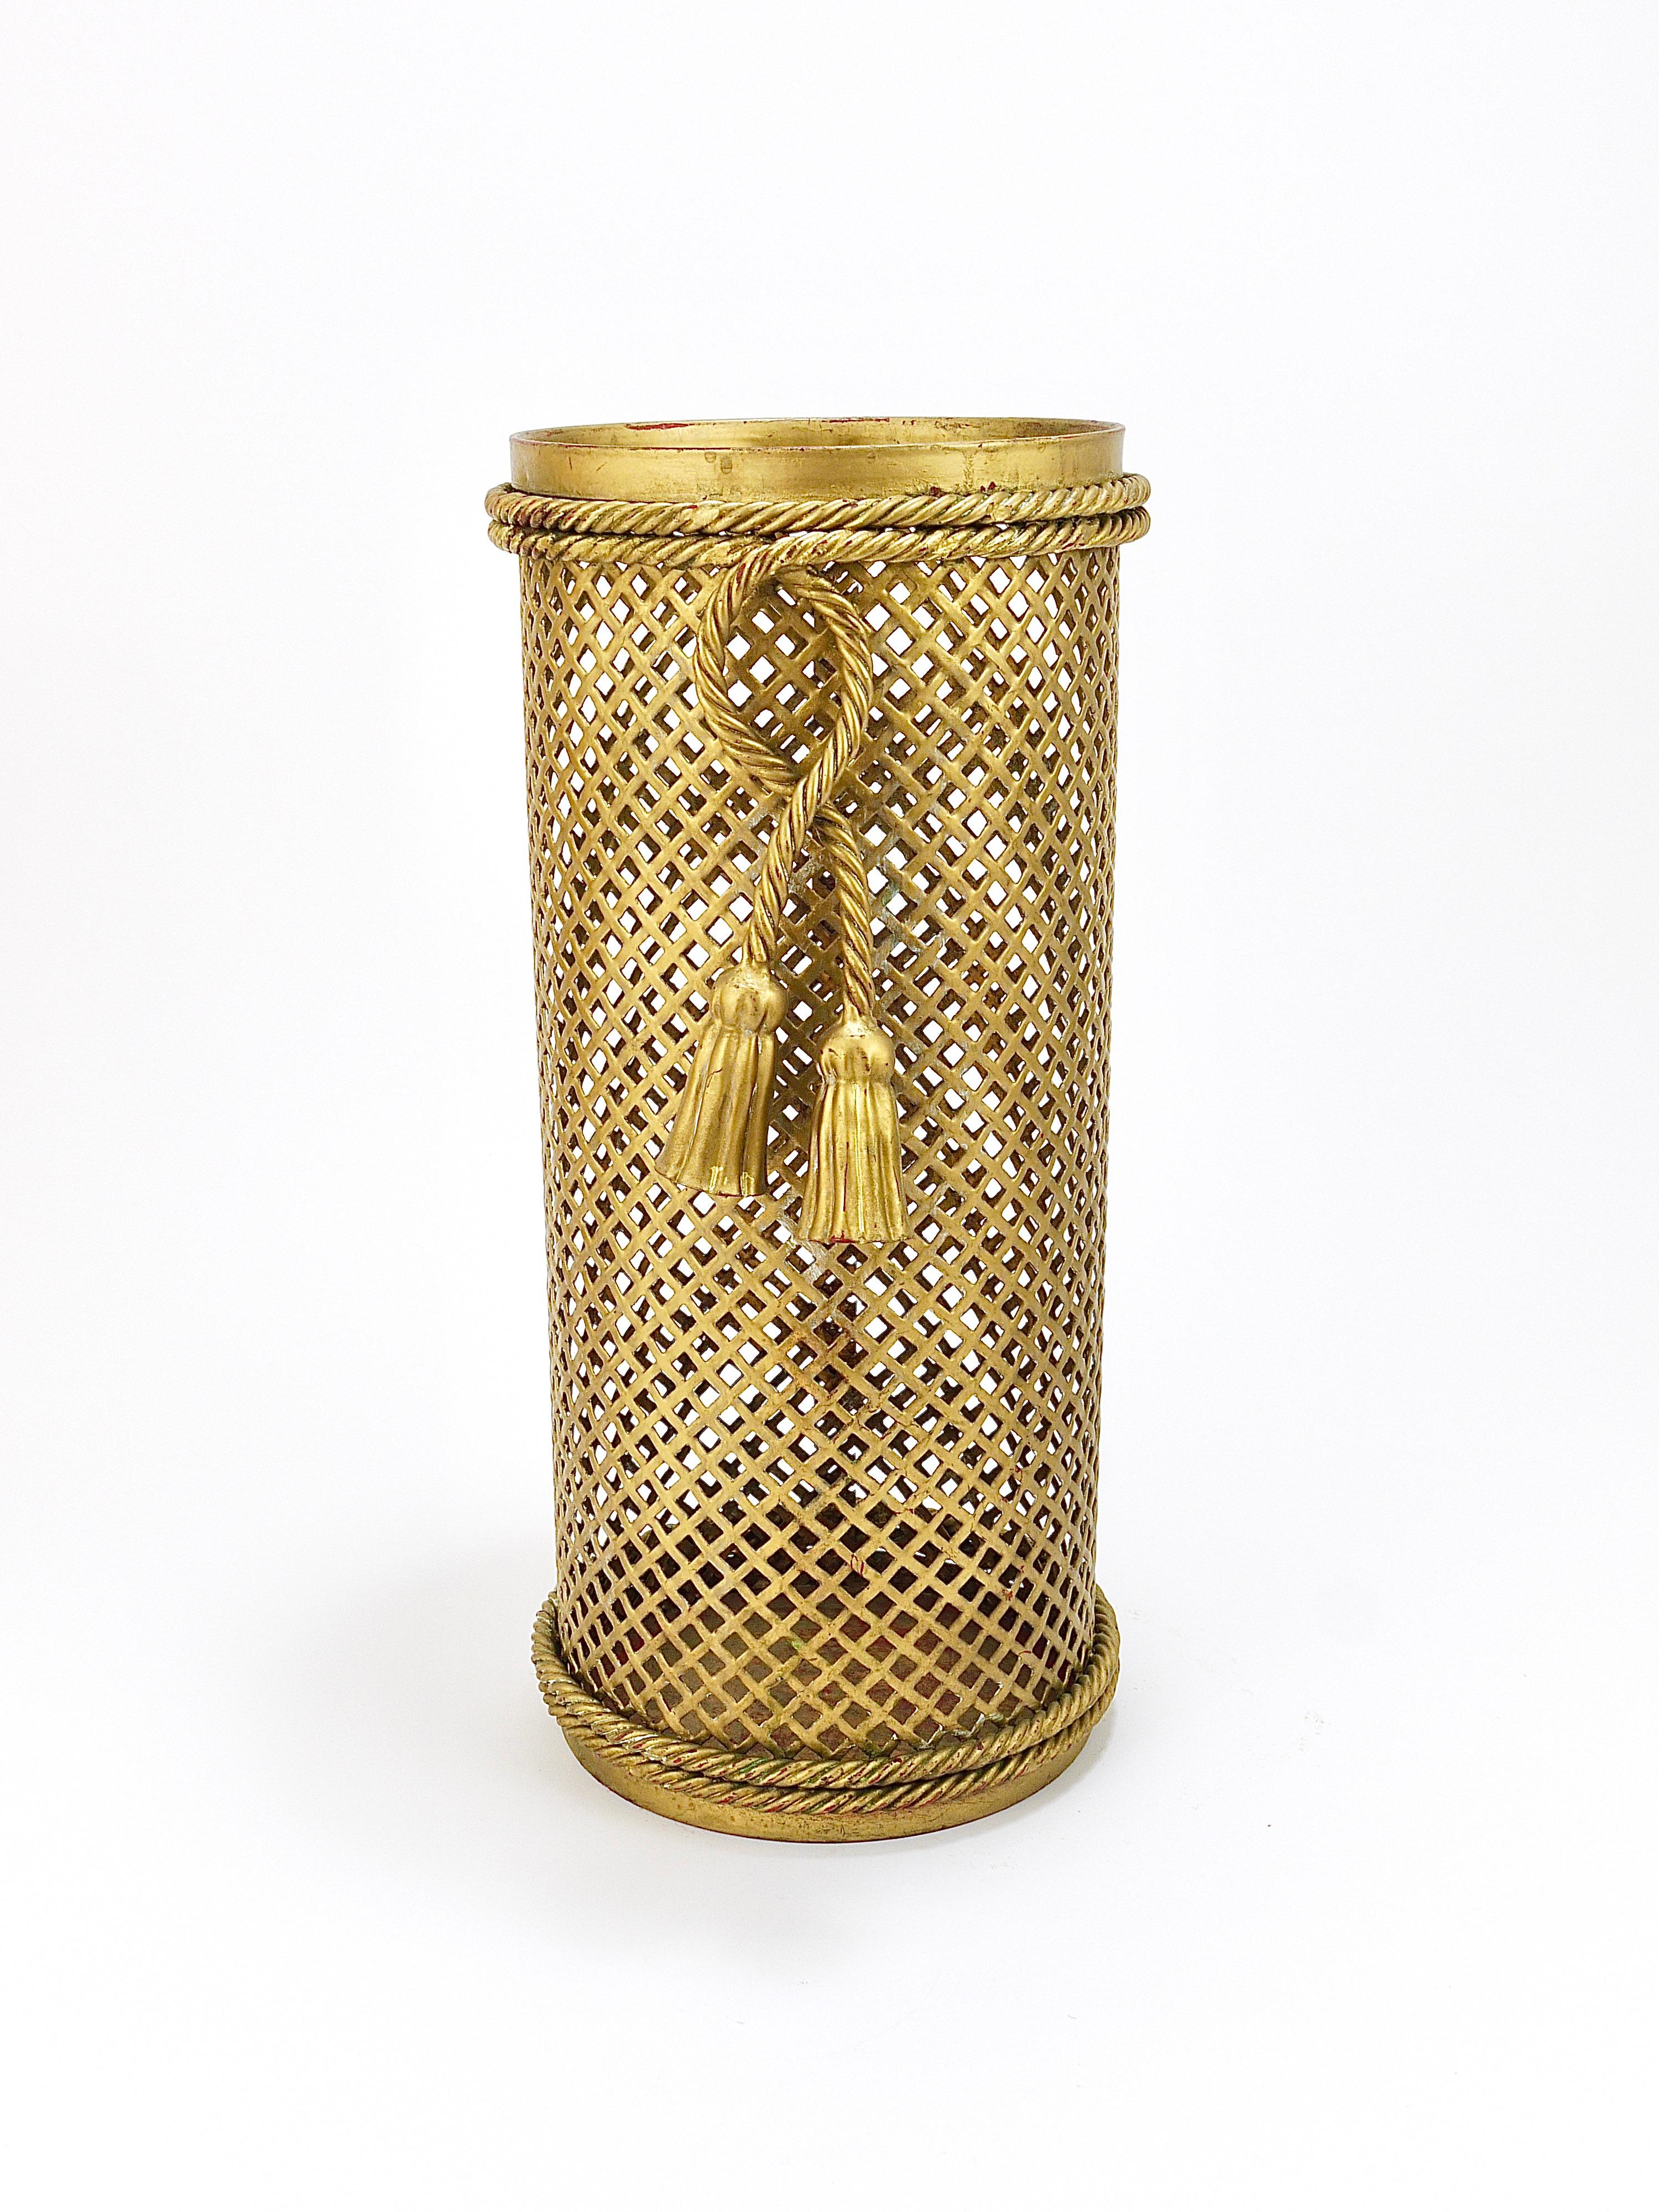 A beautiful cylindric Hollywood Regency umbrella stand from the 1950s, manufactured by Li Puma, Firenze in Italy. Made of woven golden lattice metal surrounded by a knotted rope with two tassels. Can also be used as a wastepaper basket / paper bin.